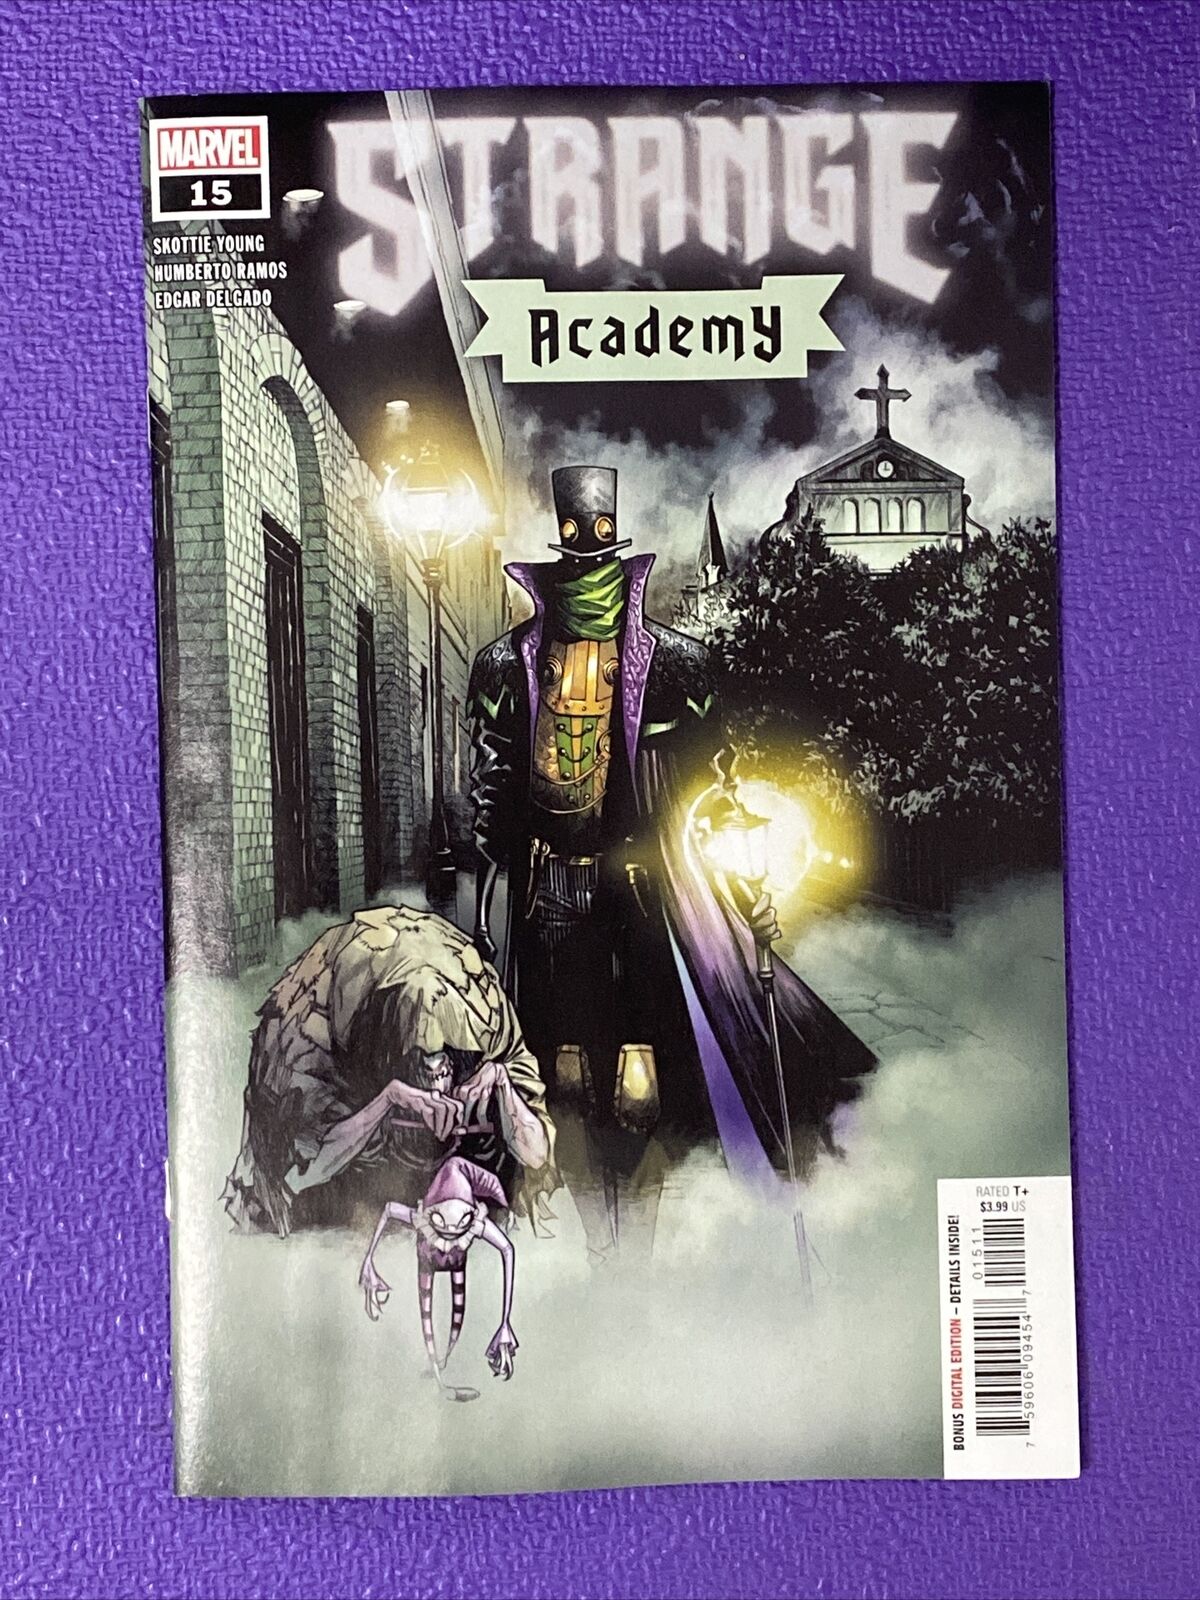 Strange Academy #15  Cover A * GASLAMP Cover by Ramos * NM